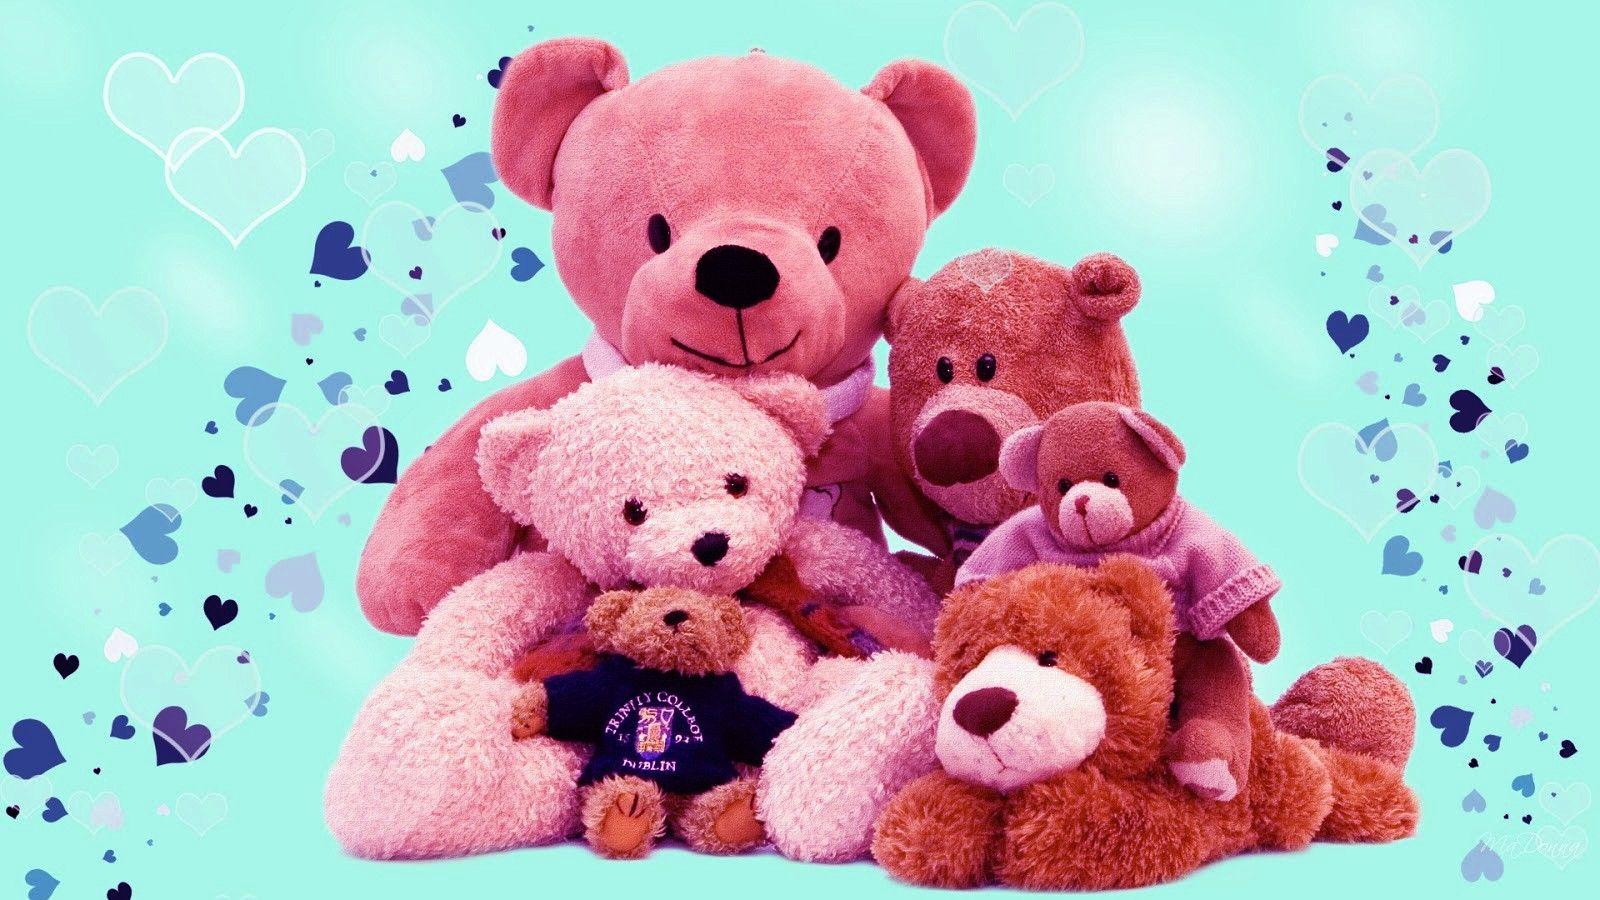 Teddy Day Image / picture / wallpaper 2018 Valentines